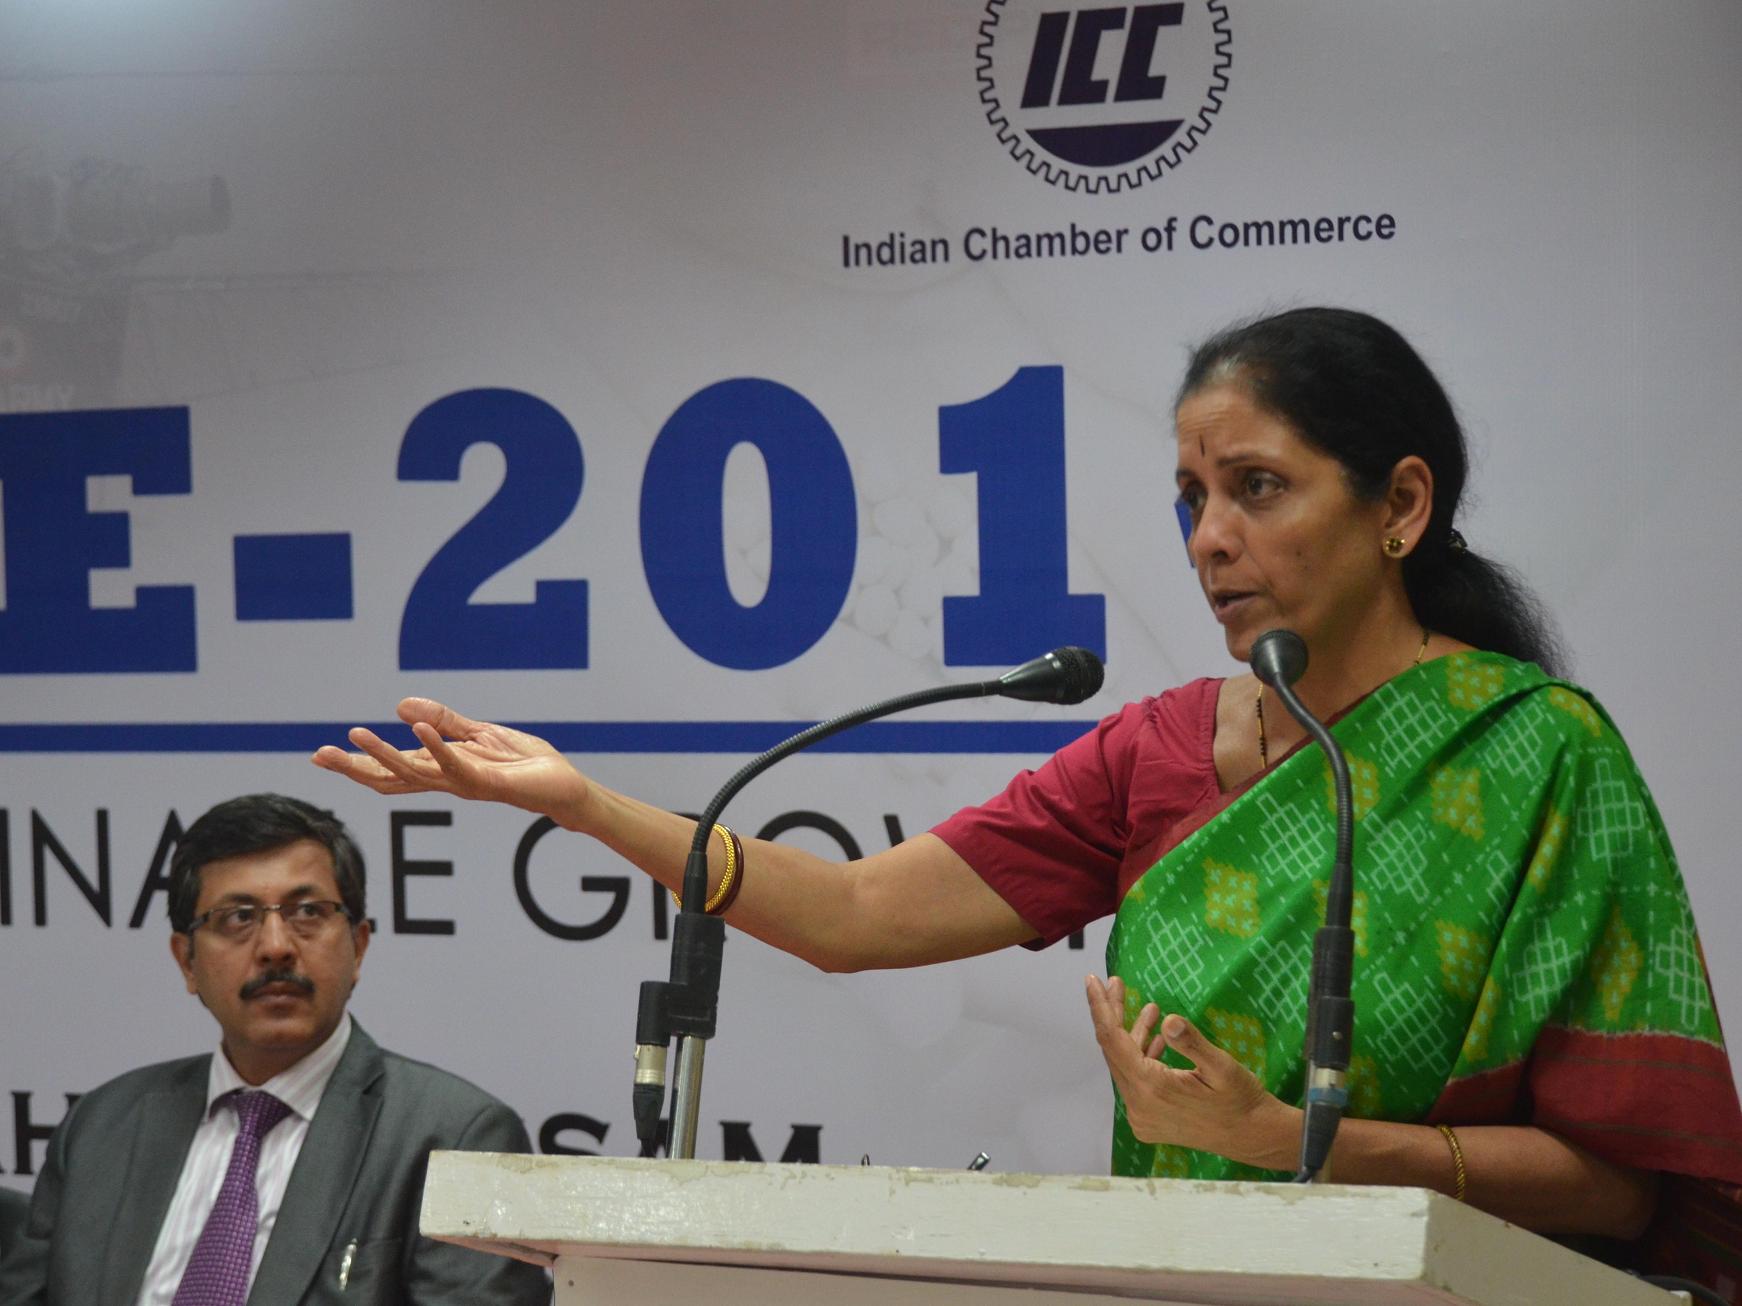 North- East India is self capable and have set examples: Nirmala Sitharaman